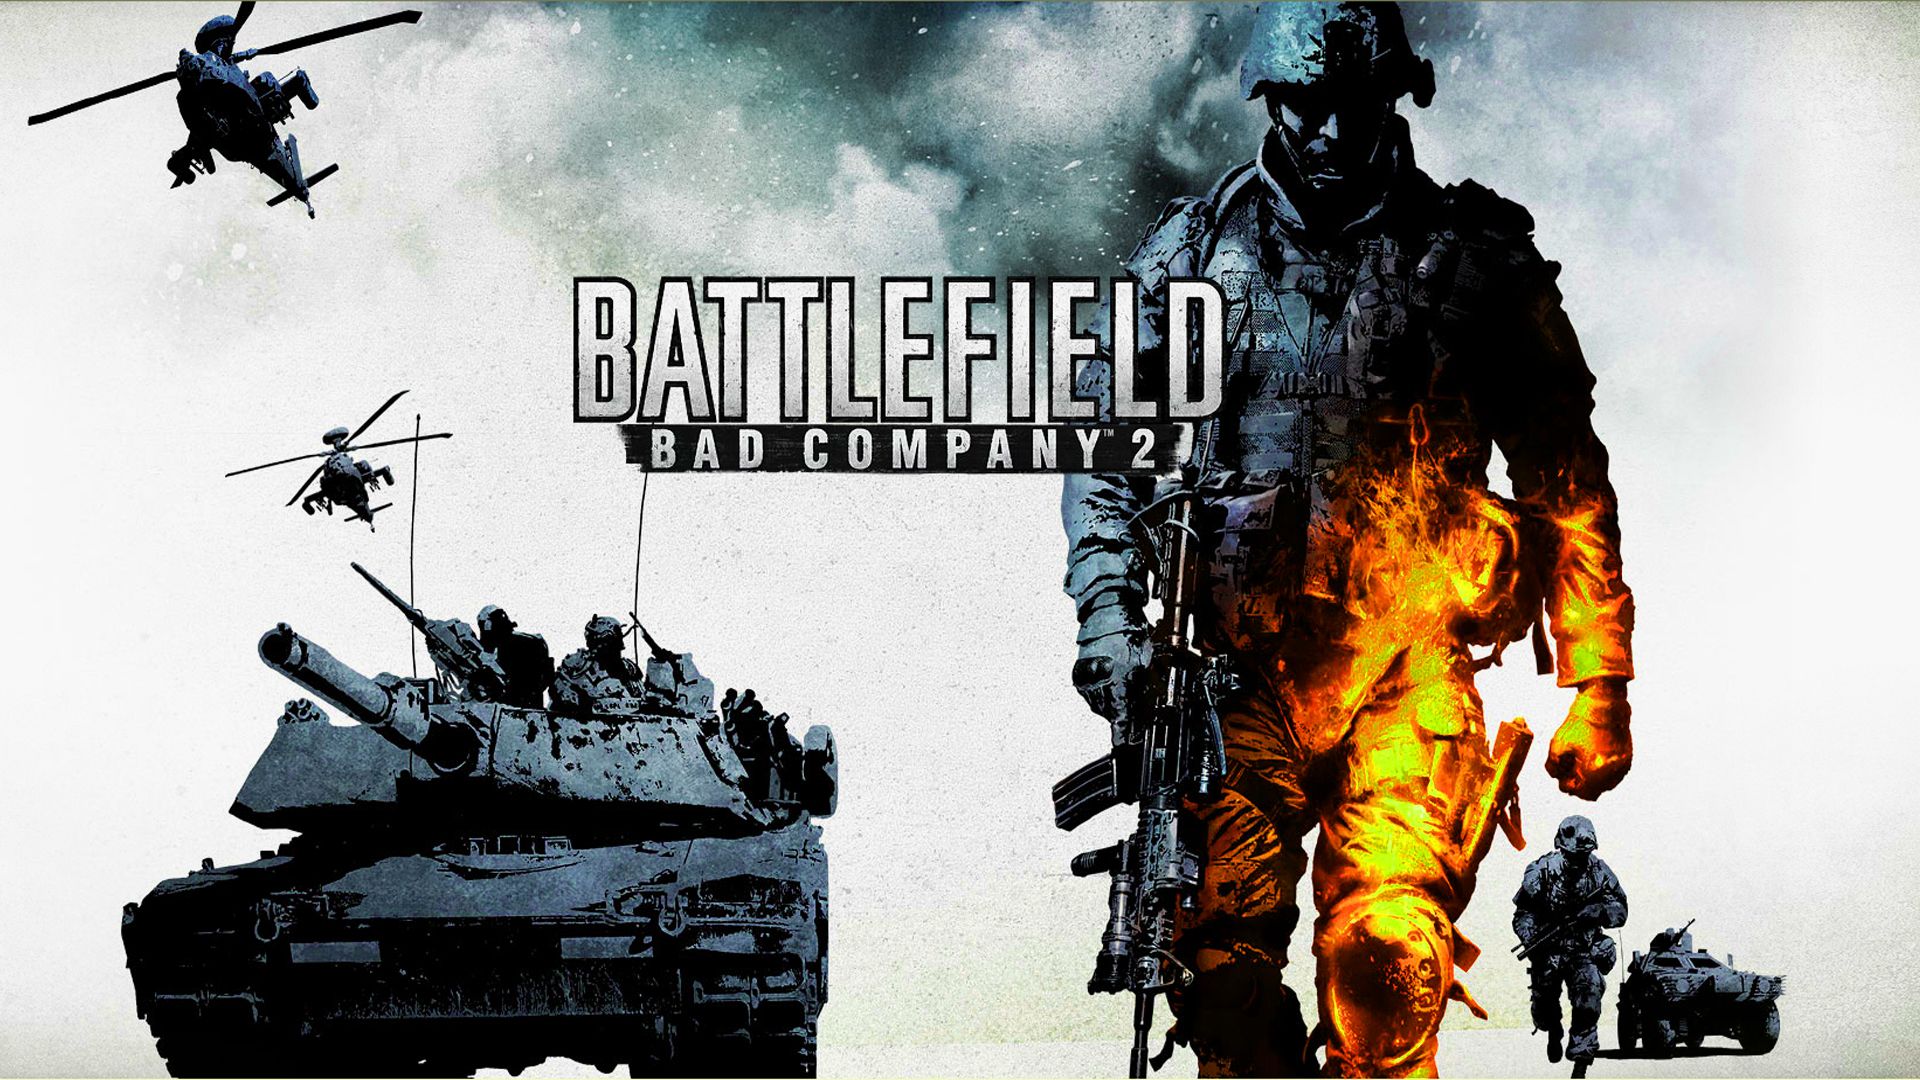 Battlefield: Bad Company Backgrounds, Compatible - PC, Mobile, Gadgets| 1920x1080 px